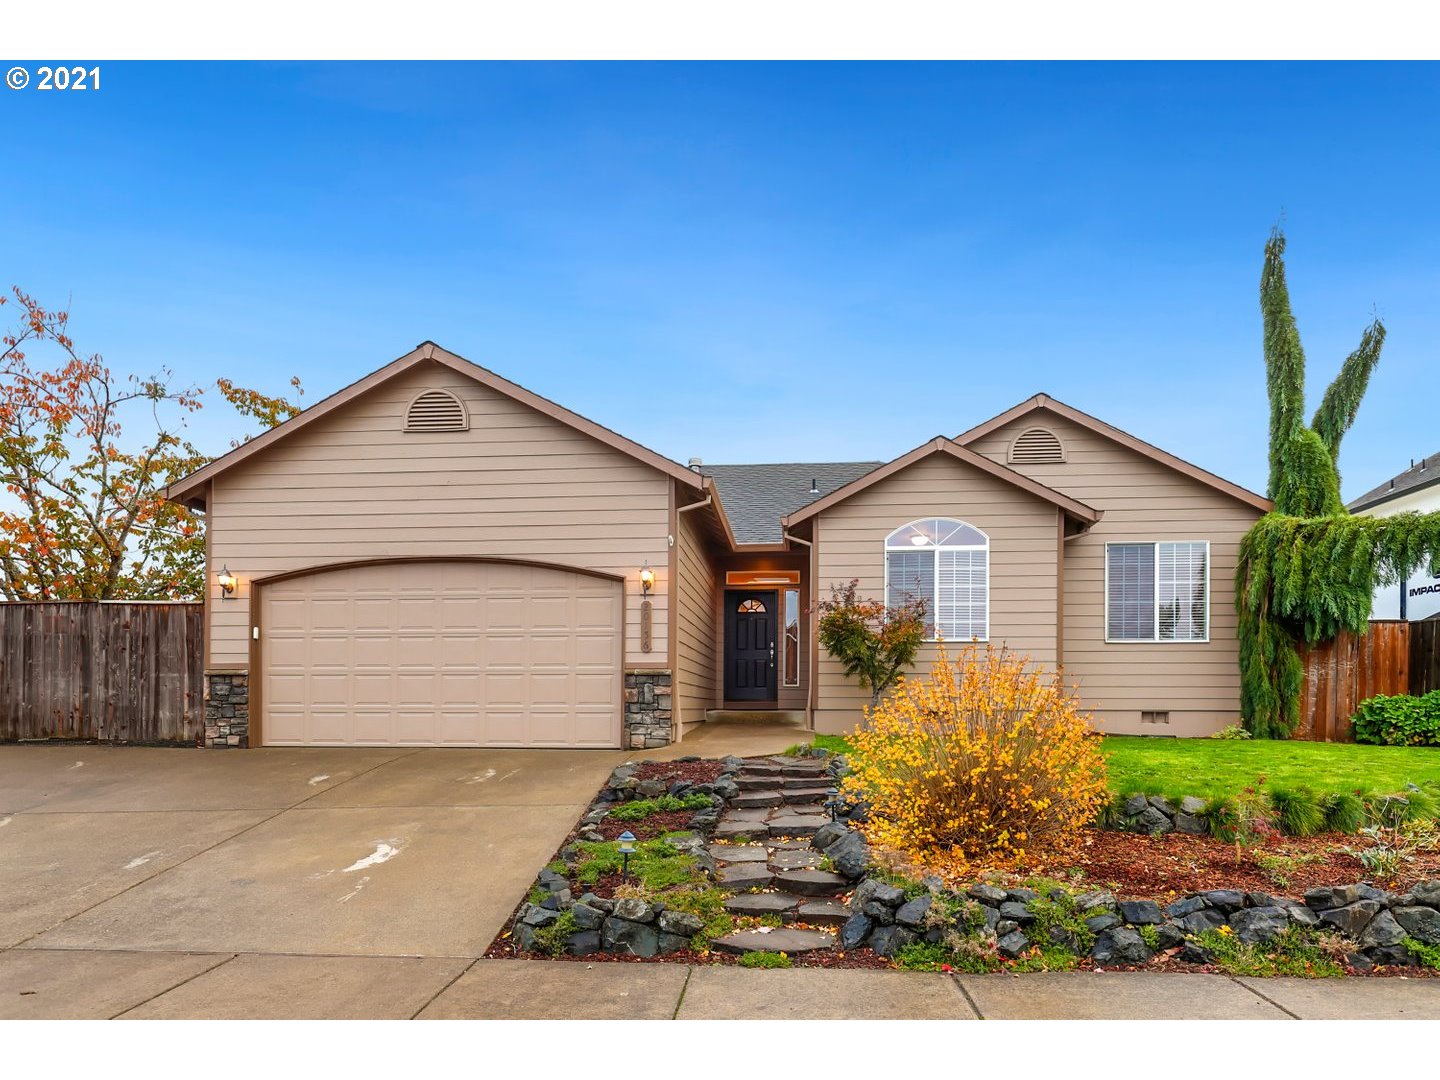 20156 CANTERWOOD CT (1 of 32)